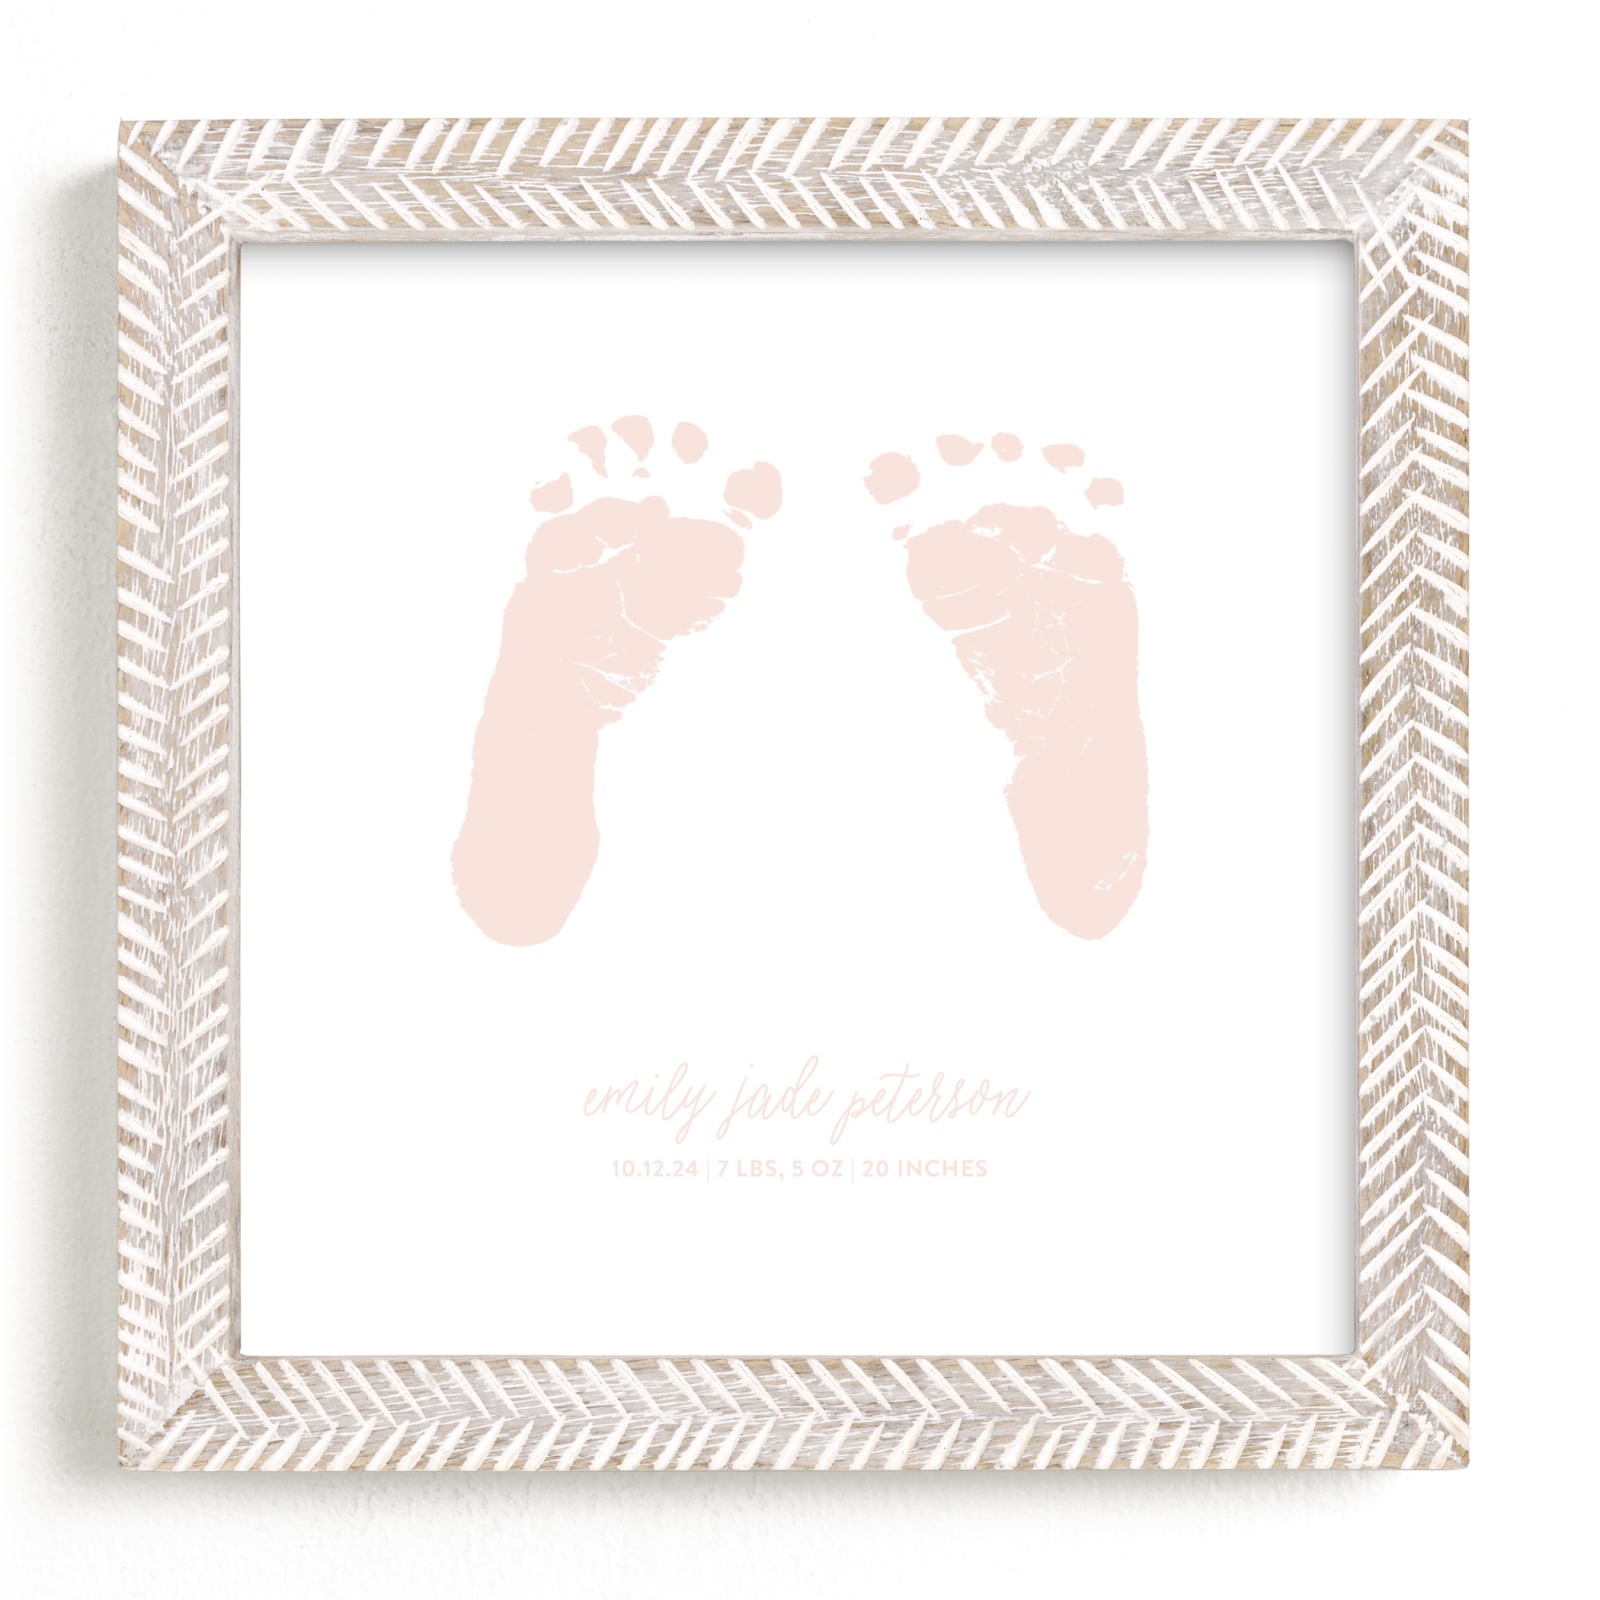 This is a pink photos to art by Minted Custom called Custom Footprints Letterpress Art.